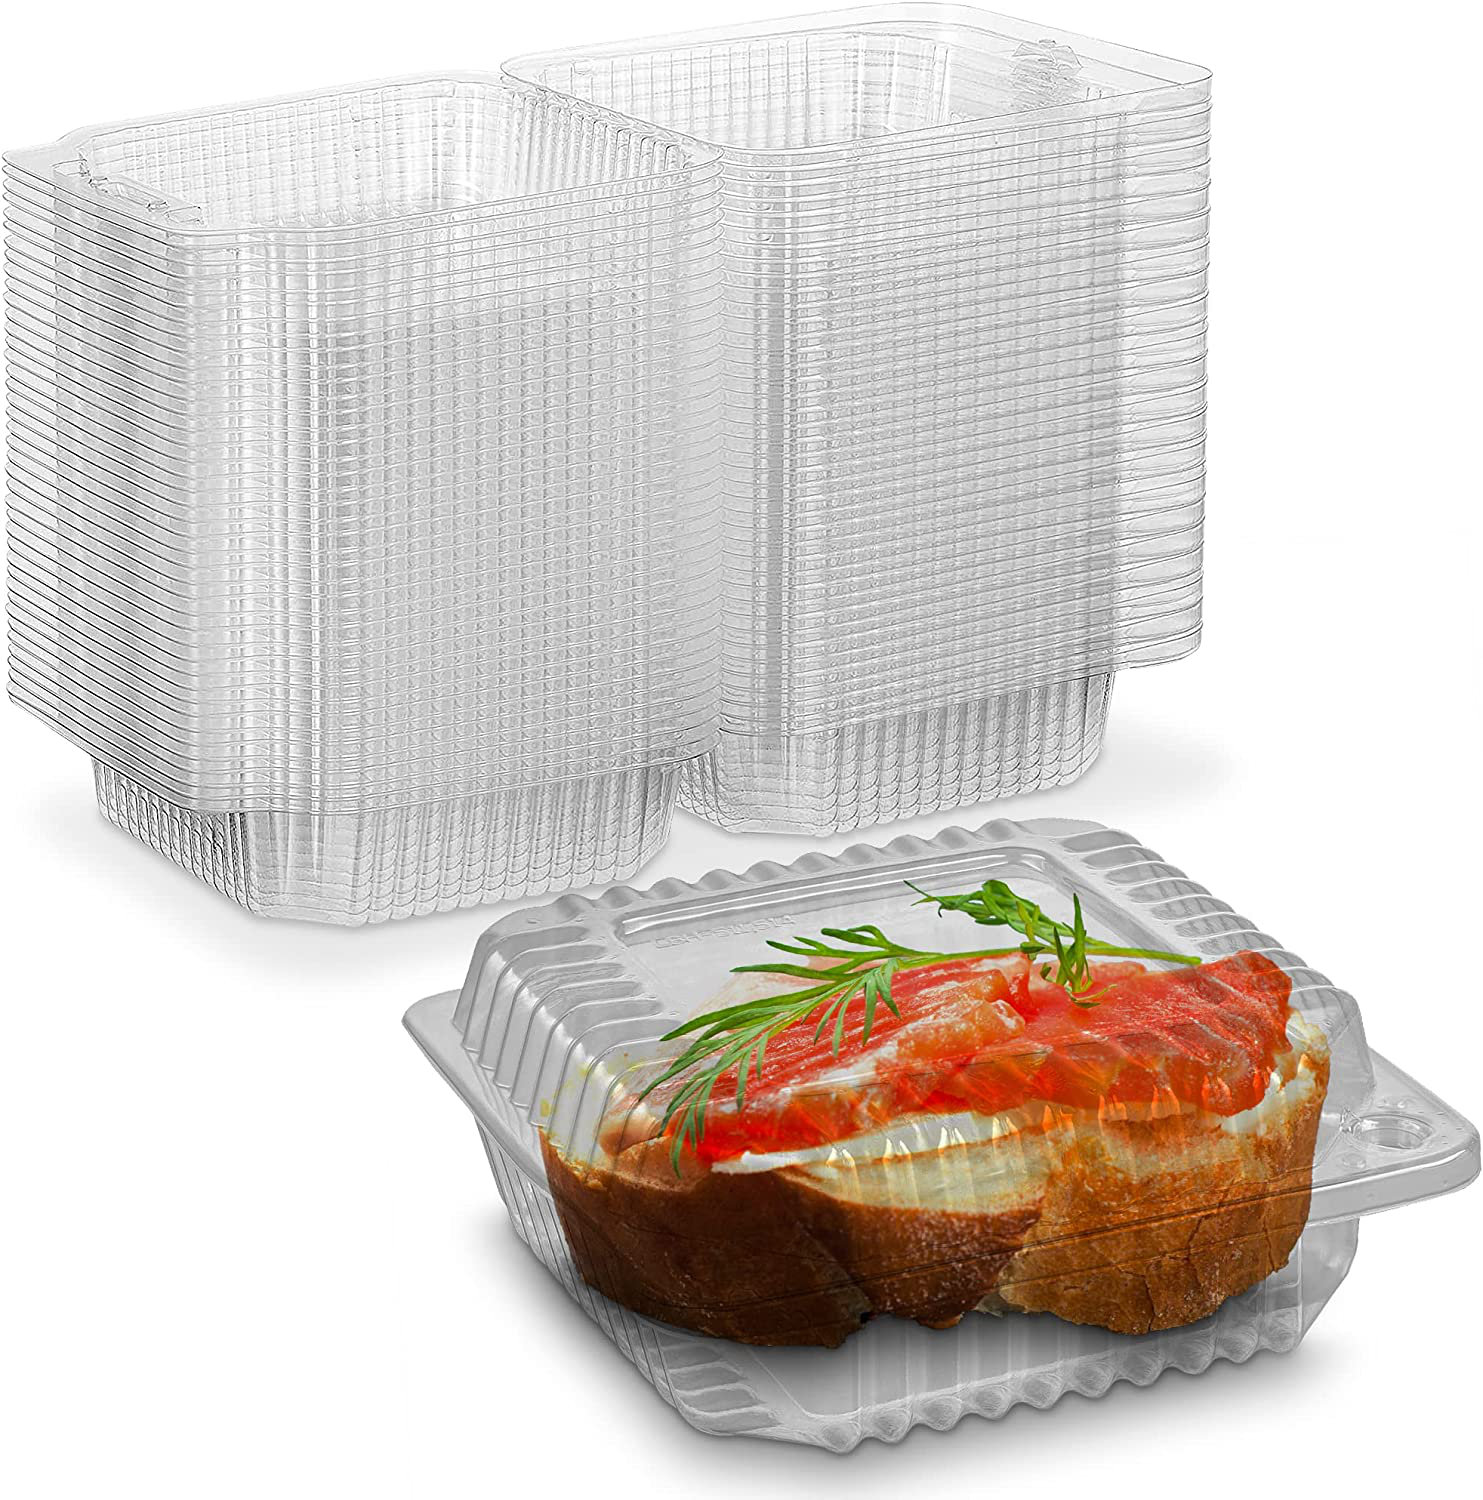 32 oz. Clear Hinged Deli Fruit Container 50/PK